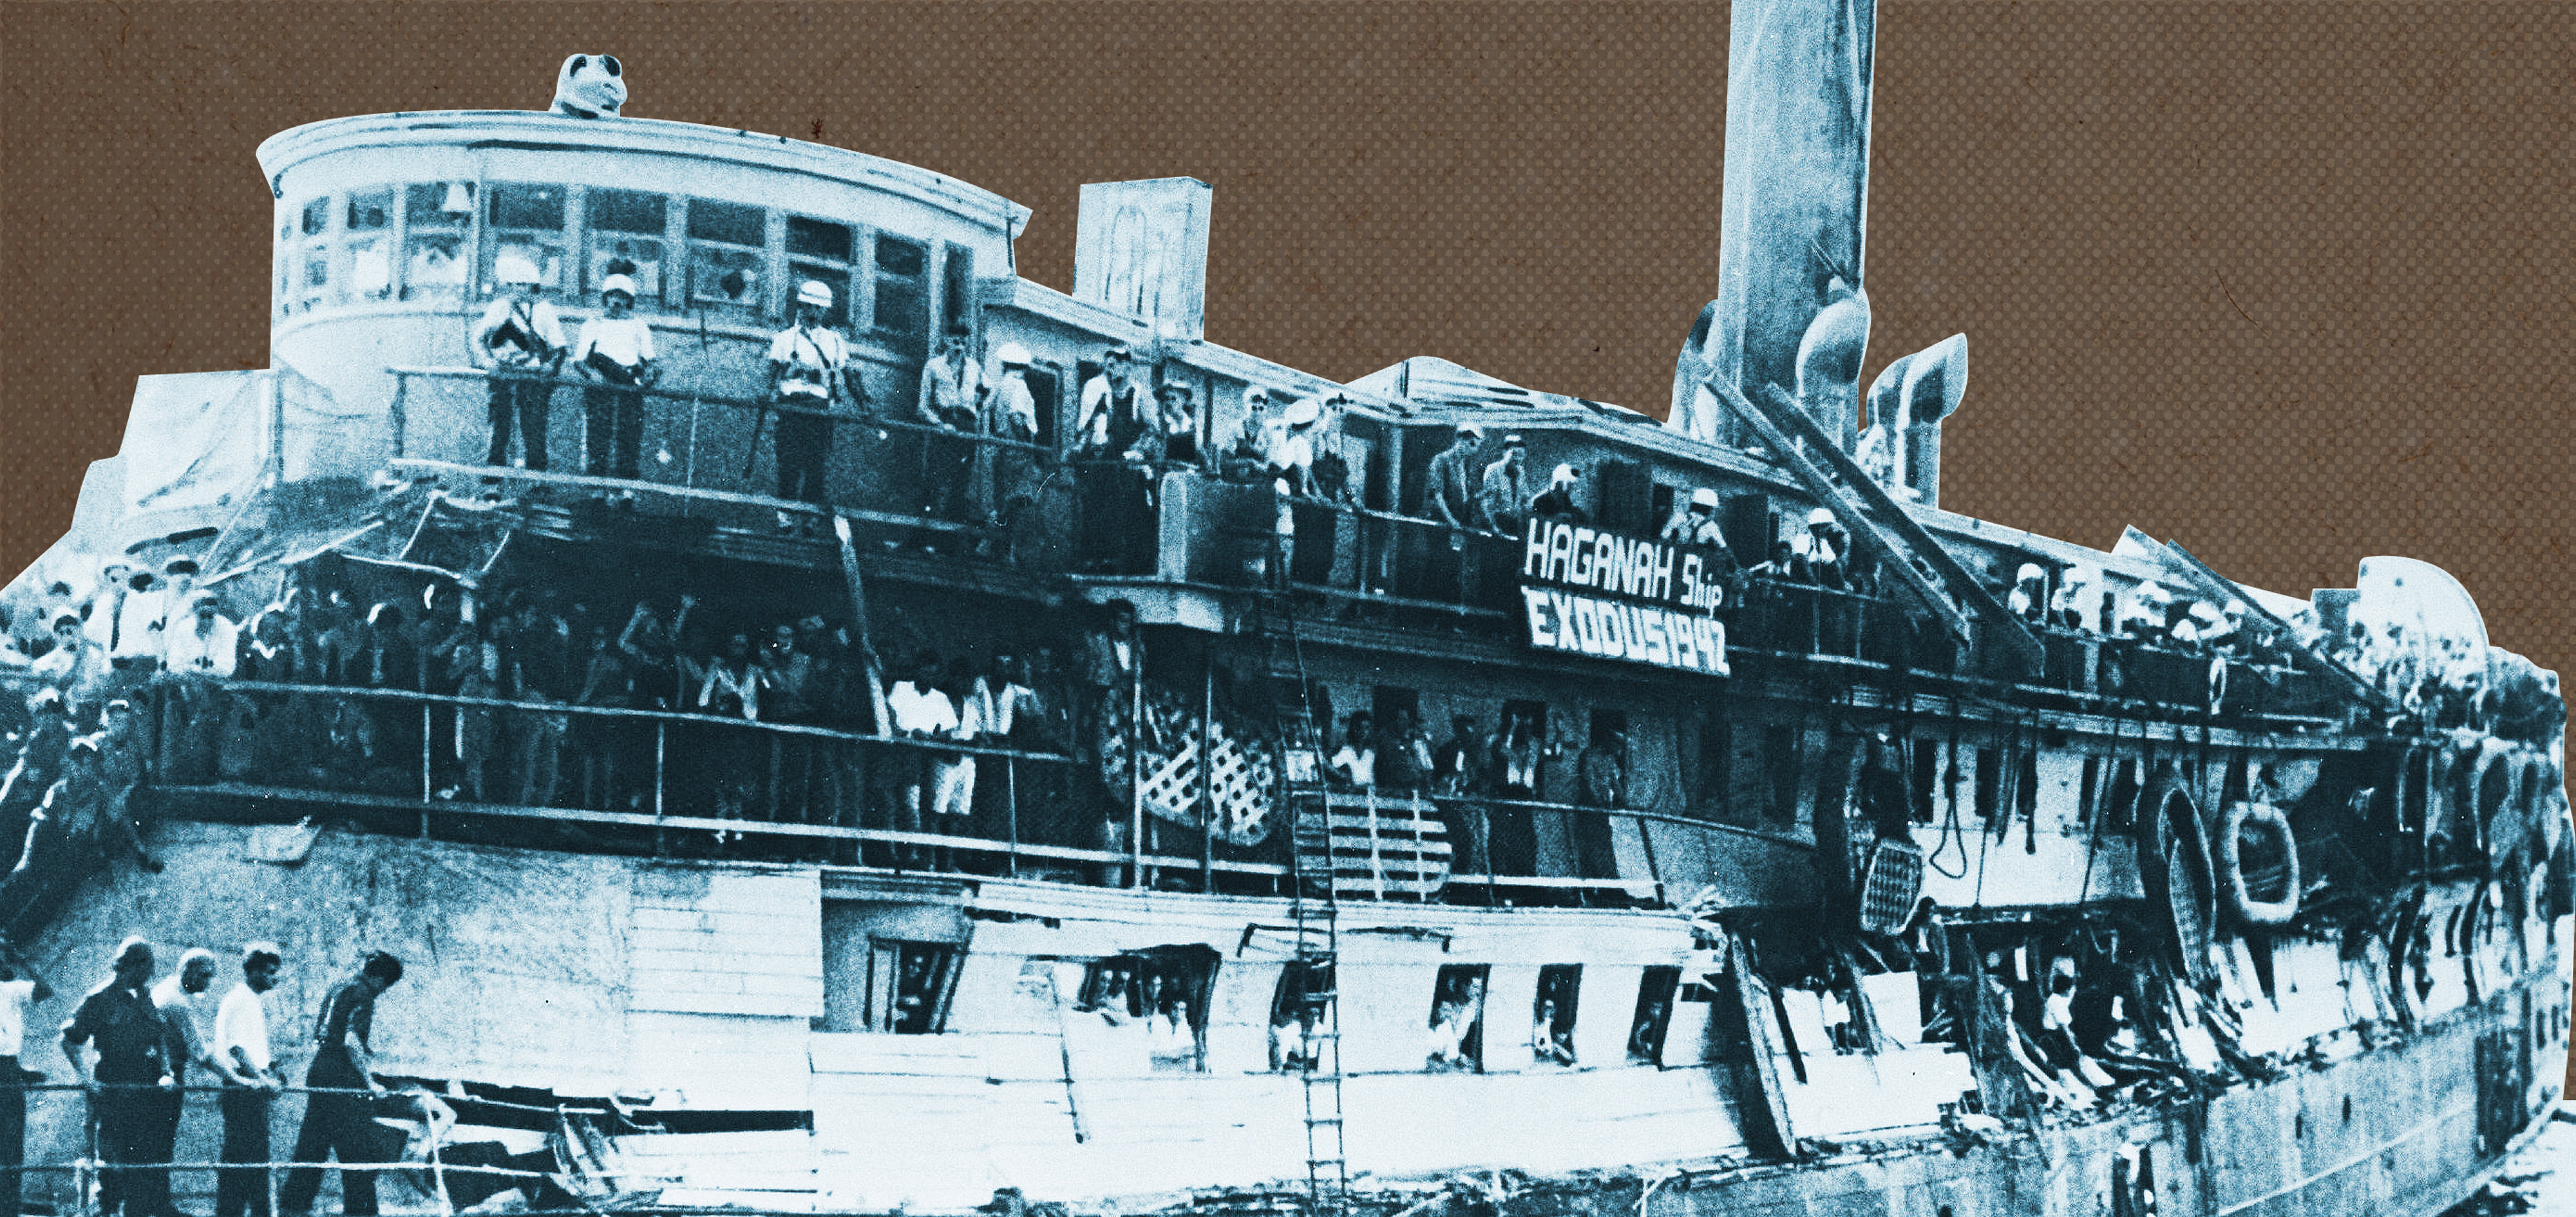 The Hannah Senesh, a boat carried 252 refugees to Palestine